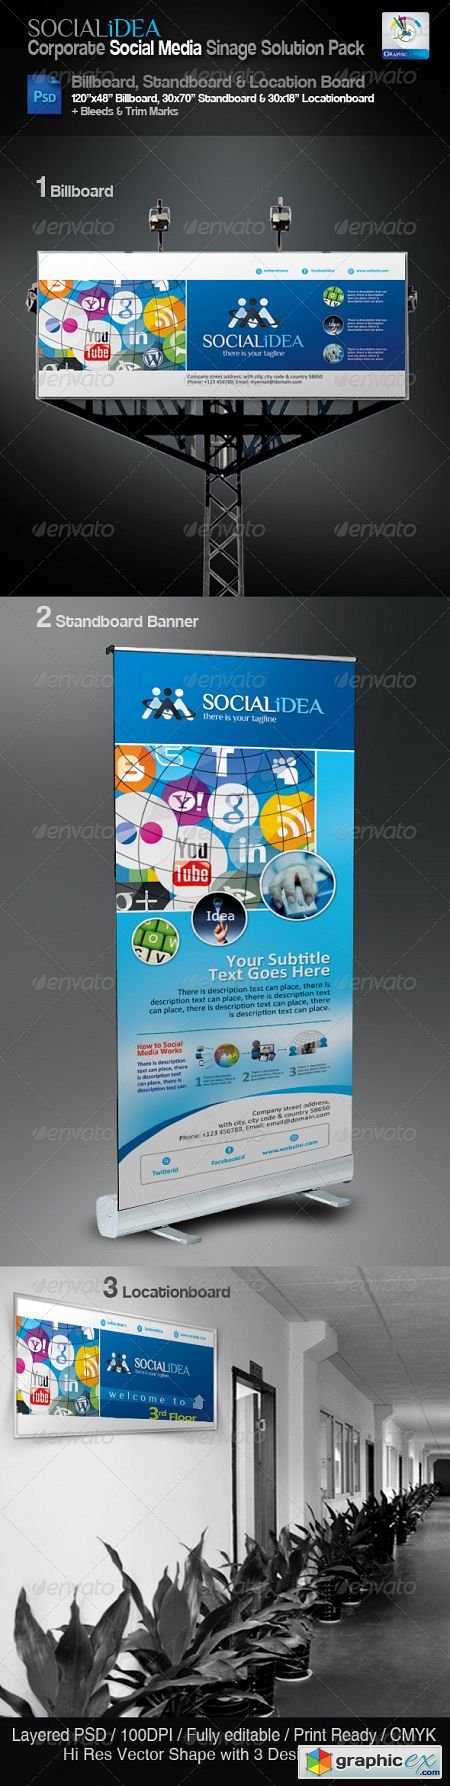 Socialidea Corporate Sinage Solution Pack